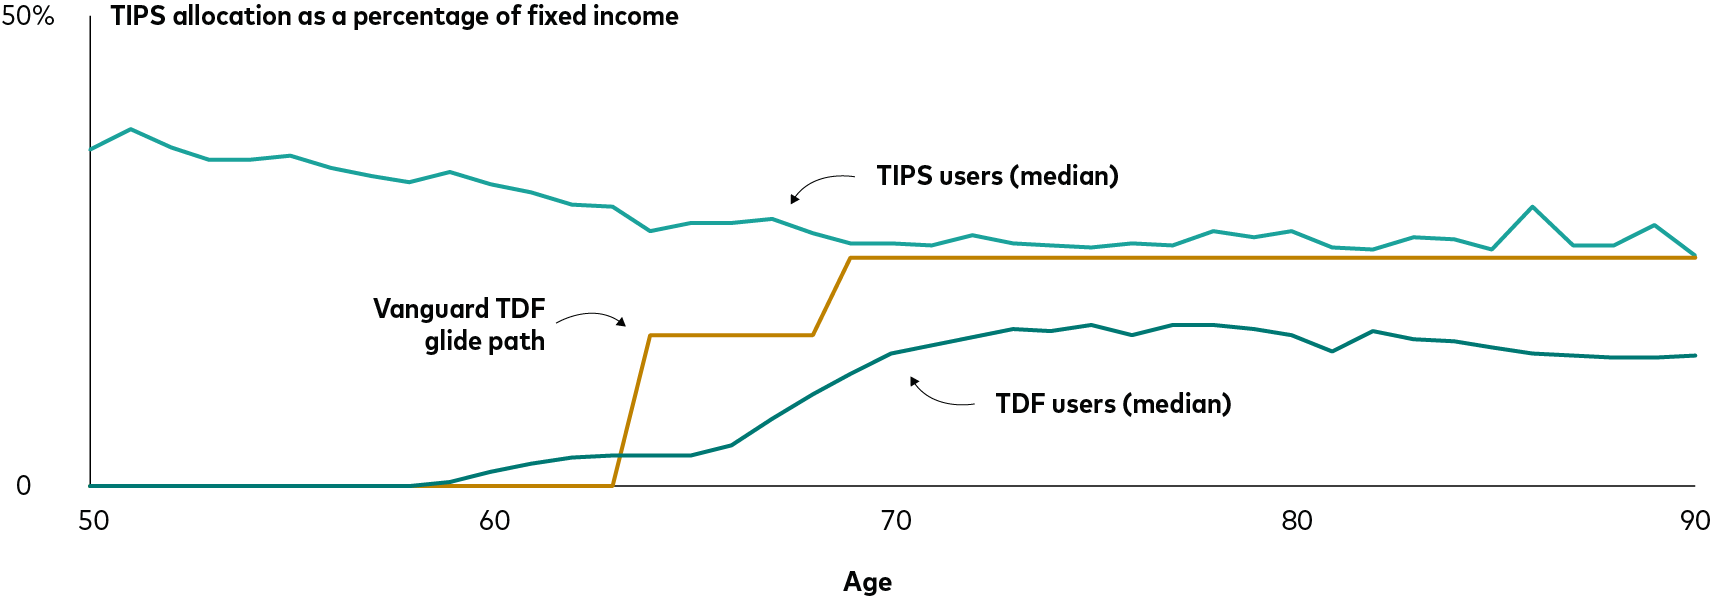 Investors’ TIPS allocation as a percentage of their fixed income holdings from ages 21 through 90. The proportion of TIPS users starts at roughly 35% for young investors and decreases to closer to 25% for older investors. The proportion of TDF users starts at 0%, begins to increase for investors in their 60s, and plateaus for older investors at around 20%. The Vanguard TDF glide path starts at 0%, begins to increase for investors in their 60s, and plateaus at about 25%.